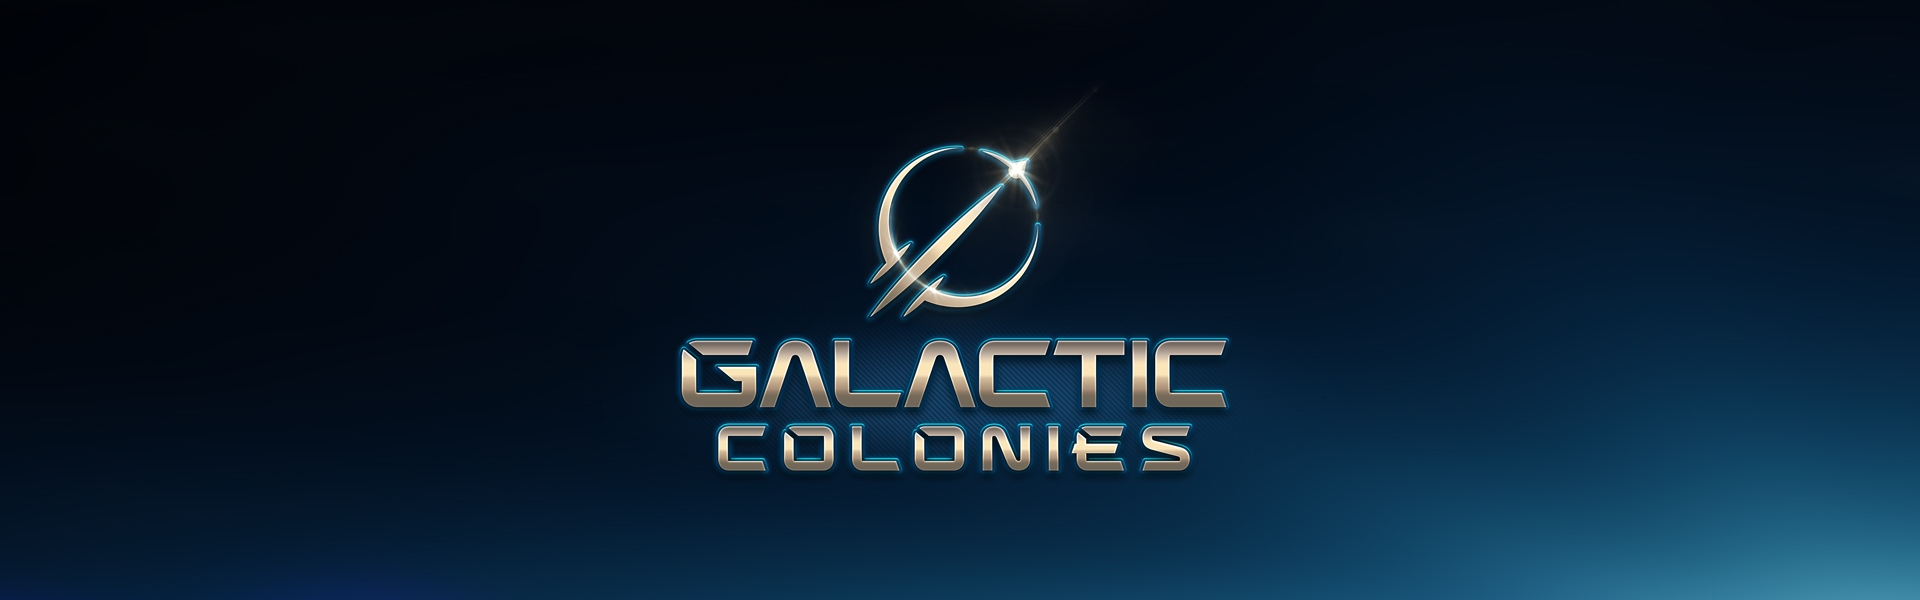 The Galactic Colonies Logo